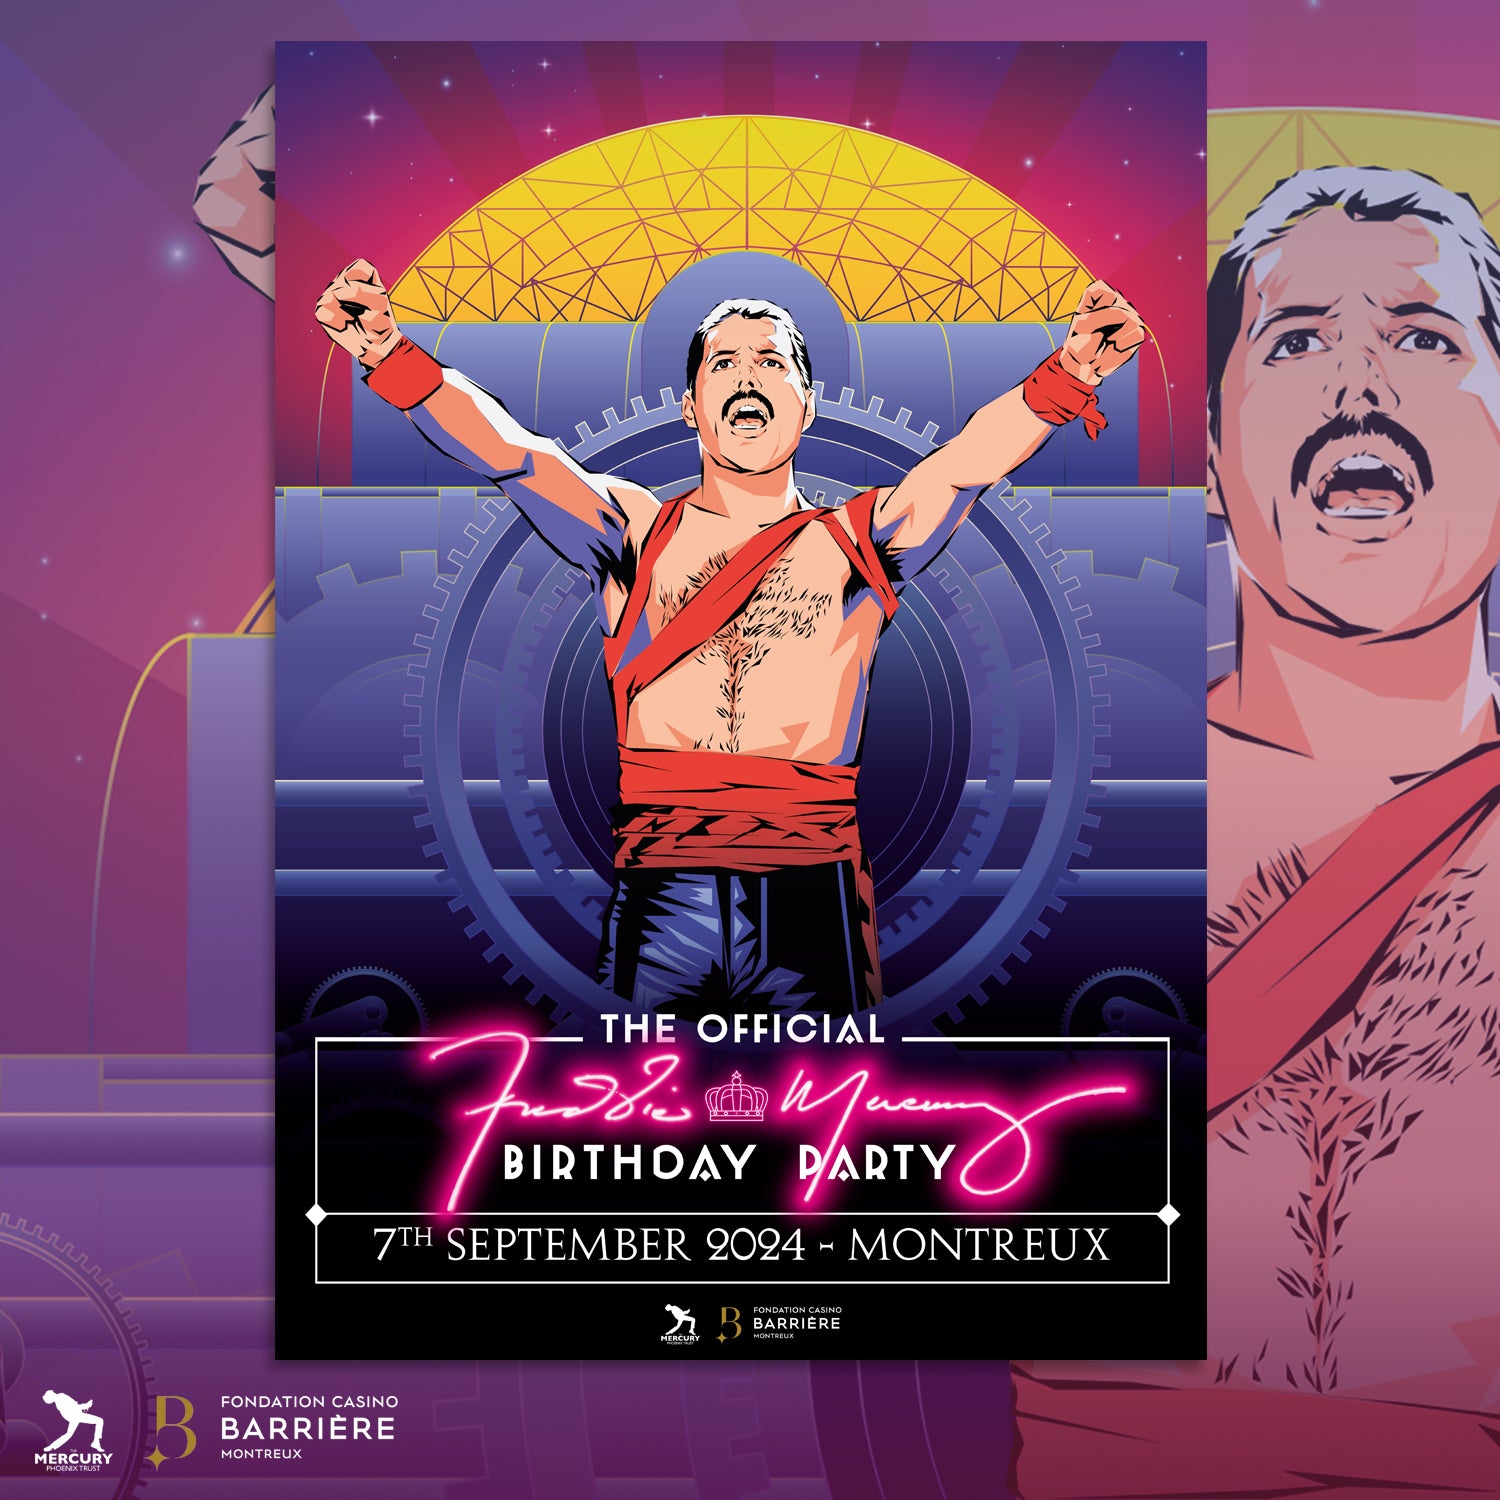 freddie for a day - The Official Freddie Mercury 78th Birthday Party Poster